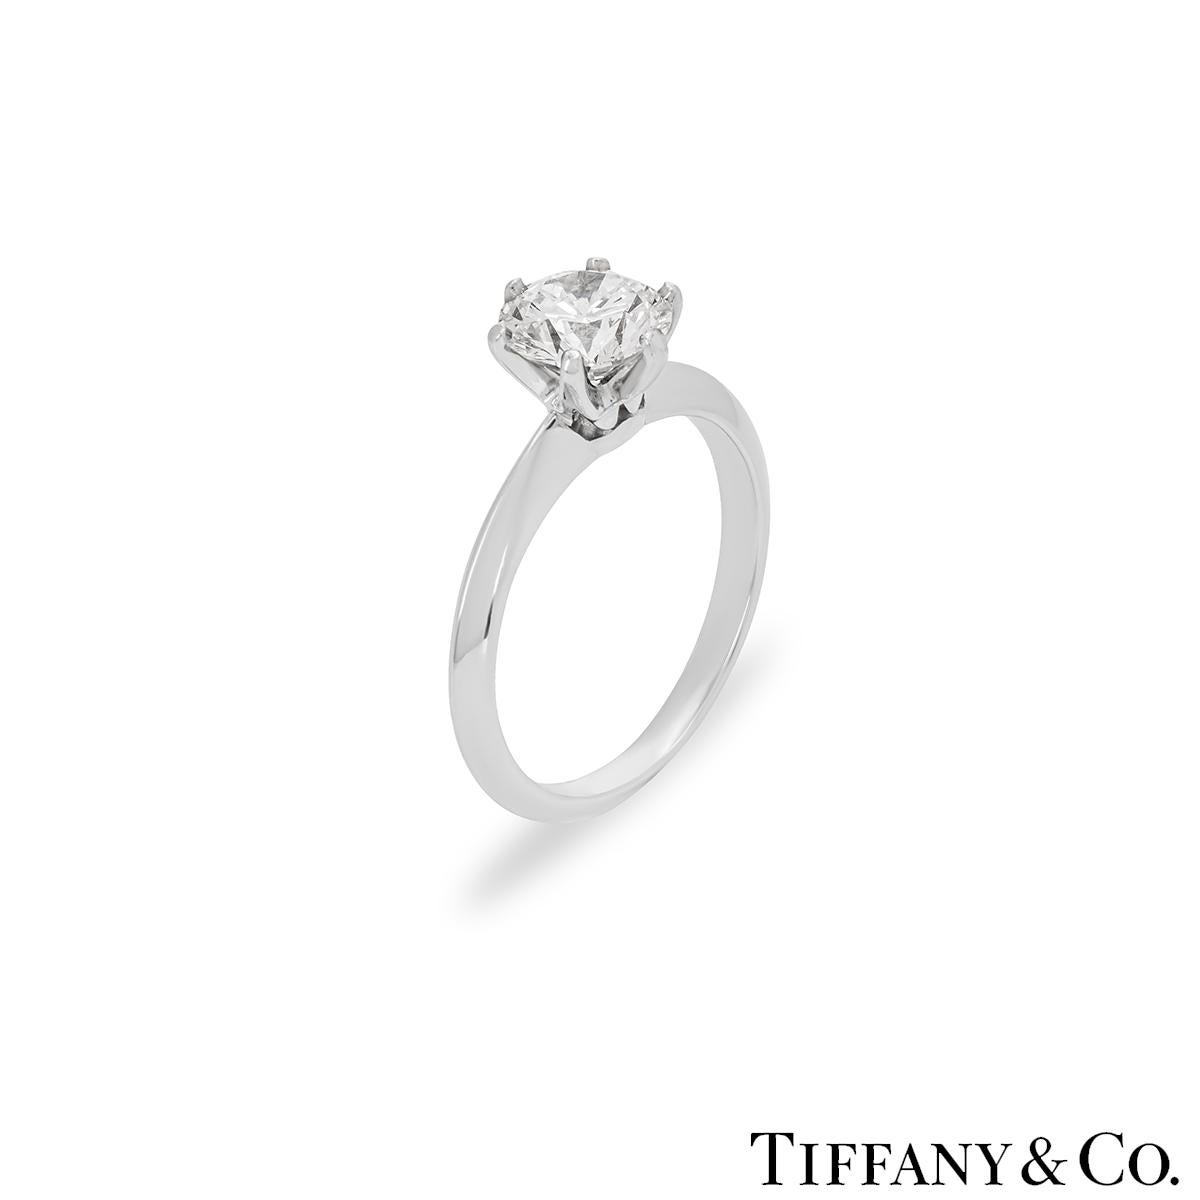 A dazzling platinum diamond solitaire ring by Tiffany & Co. from the Setting collection. The solitaire features a round brilliant cut diamond set to the centre in a 6 prong mount weighing 1.09ct, D colour and IF clarity. The knife edge ring tapers